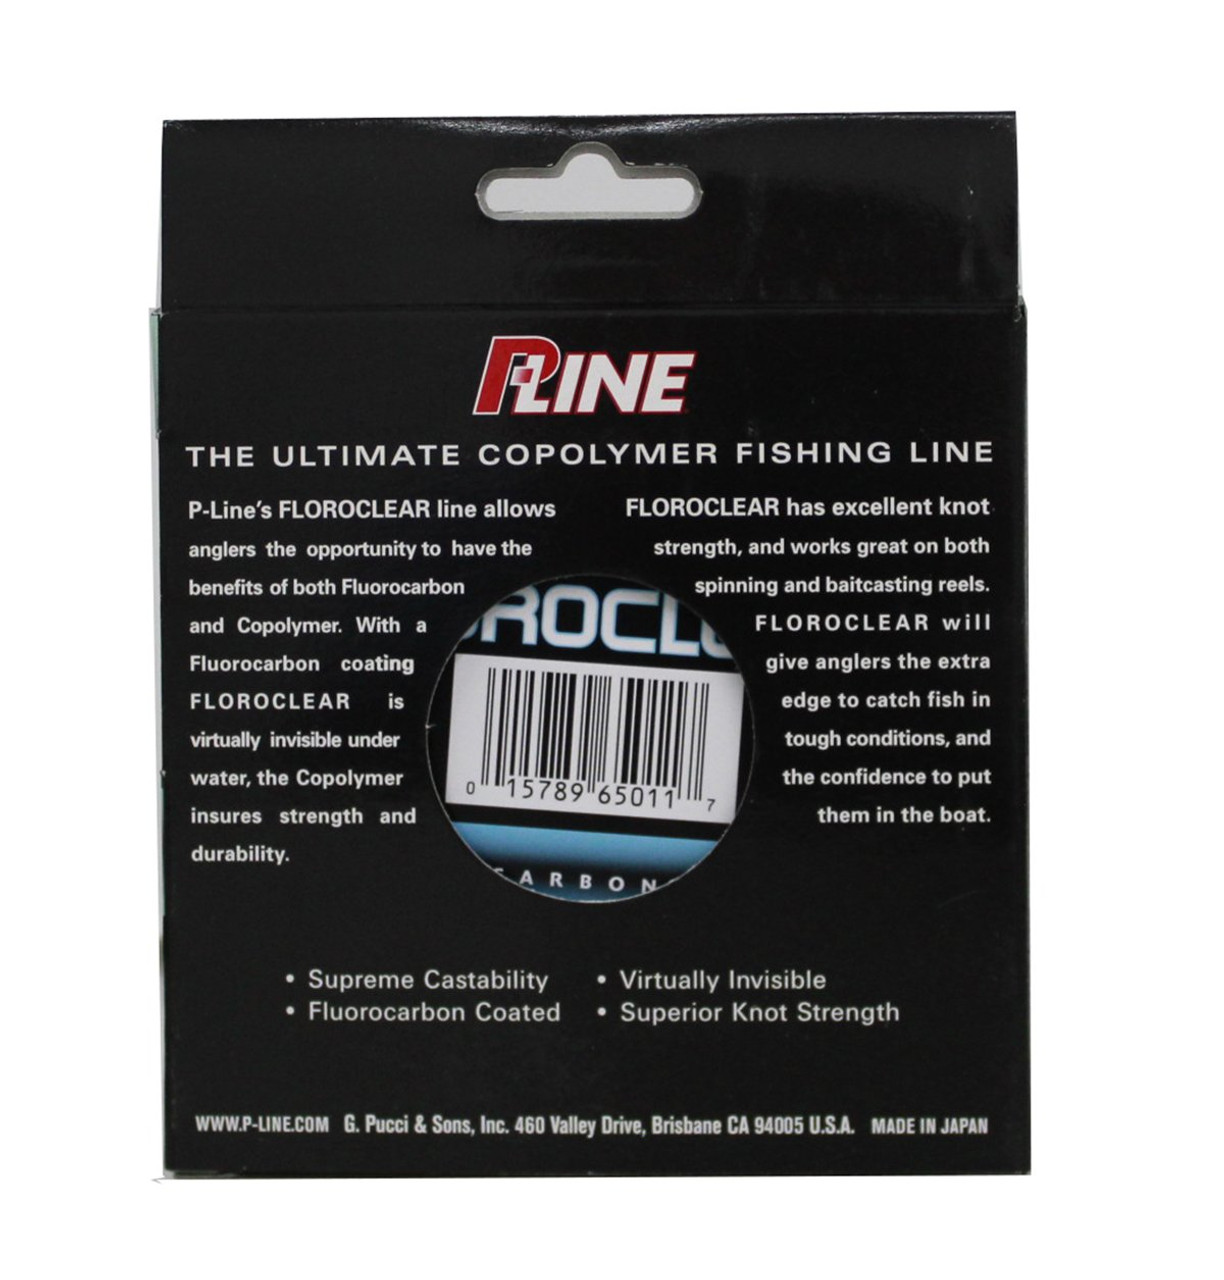 P-Line Floroclear Fluorocarbon Coated Copolymer Fishing Line